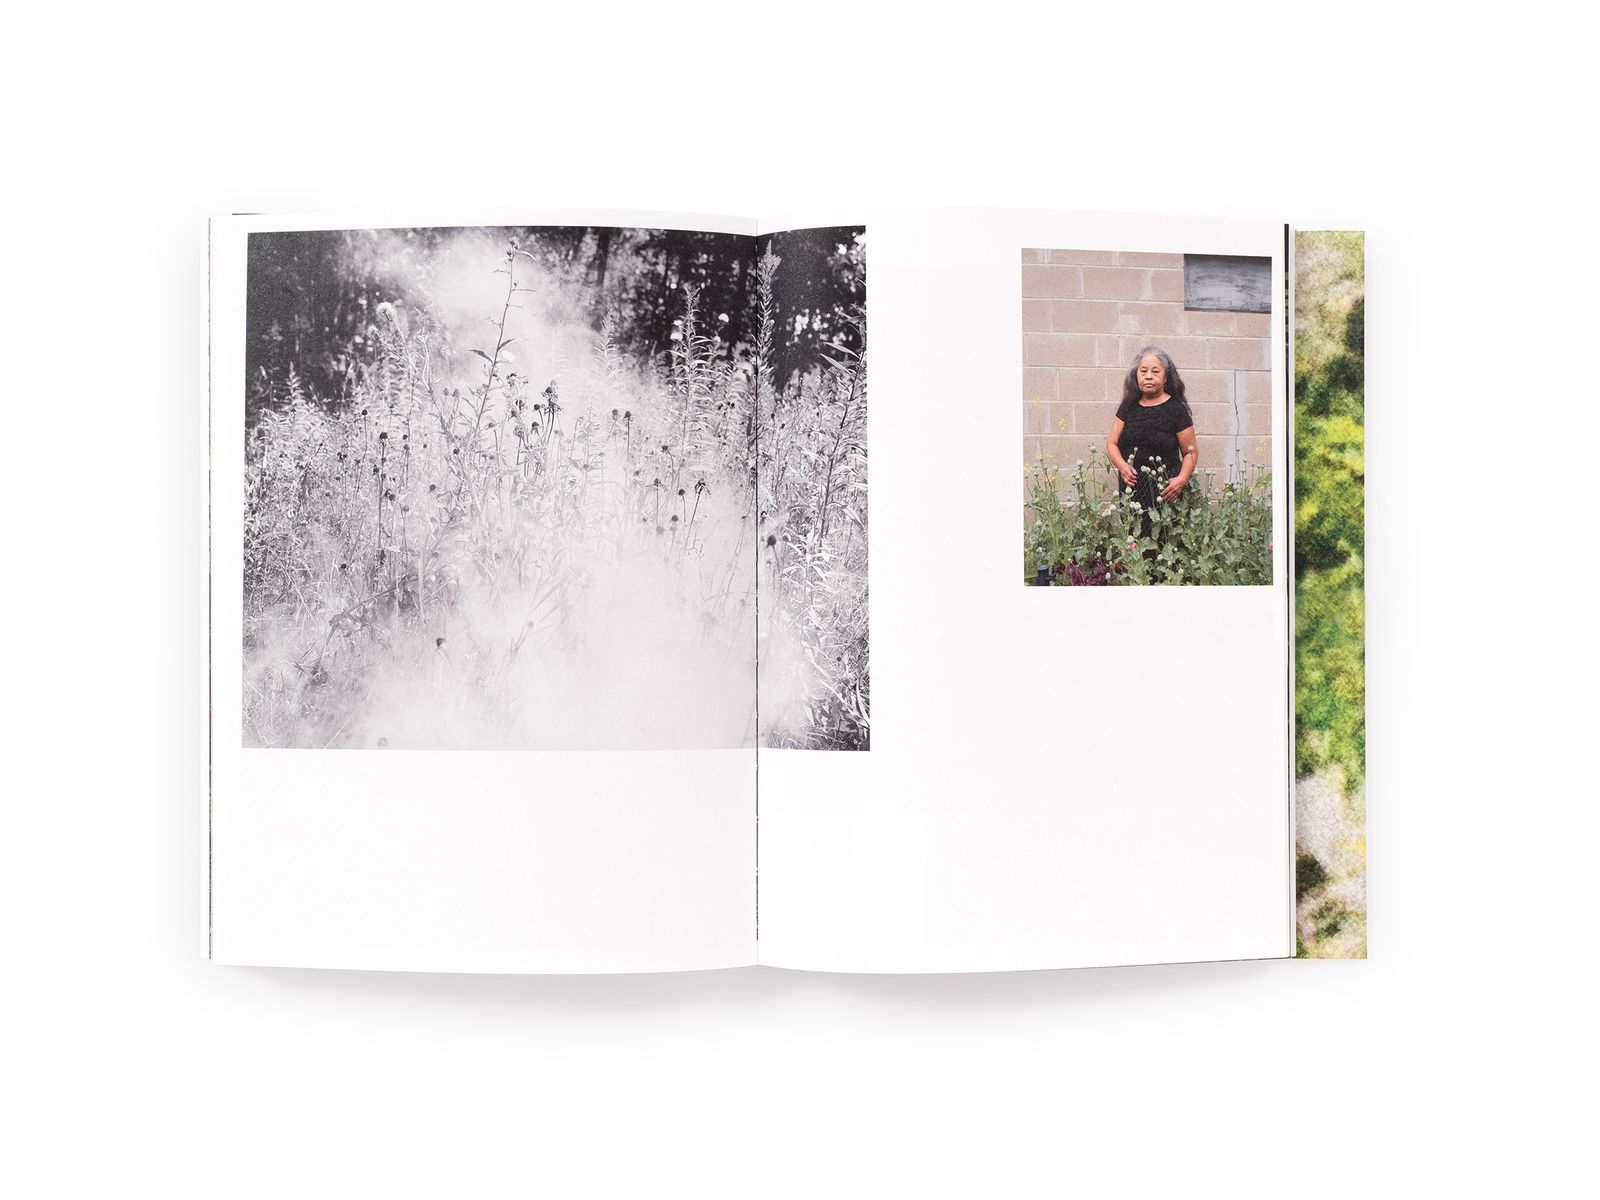 Photobook Review: My Grandfather Turned Into A Tiger... And Other Illusions by Pao Houa Her